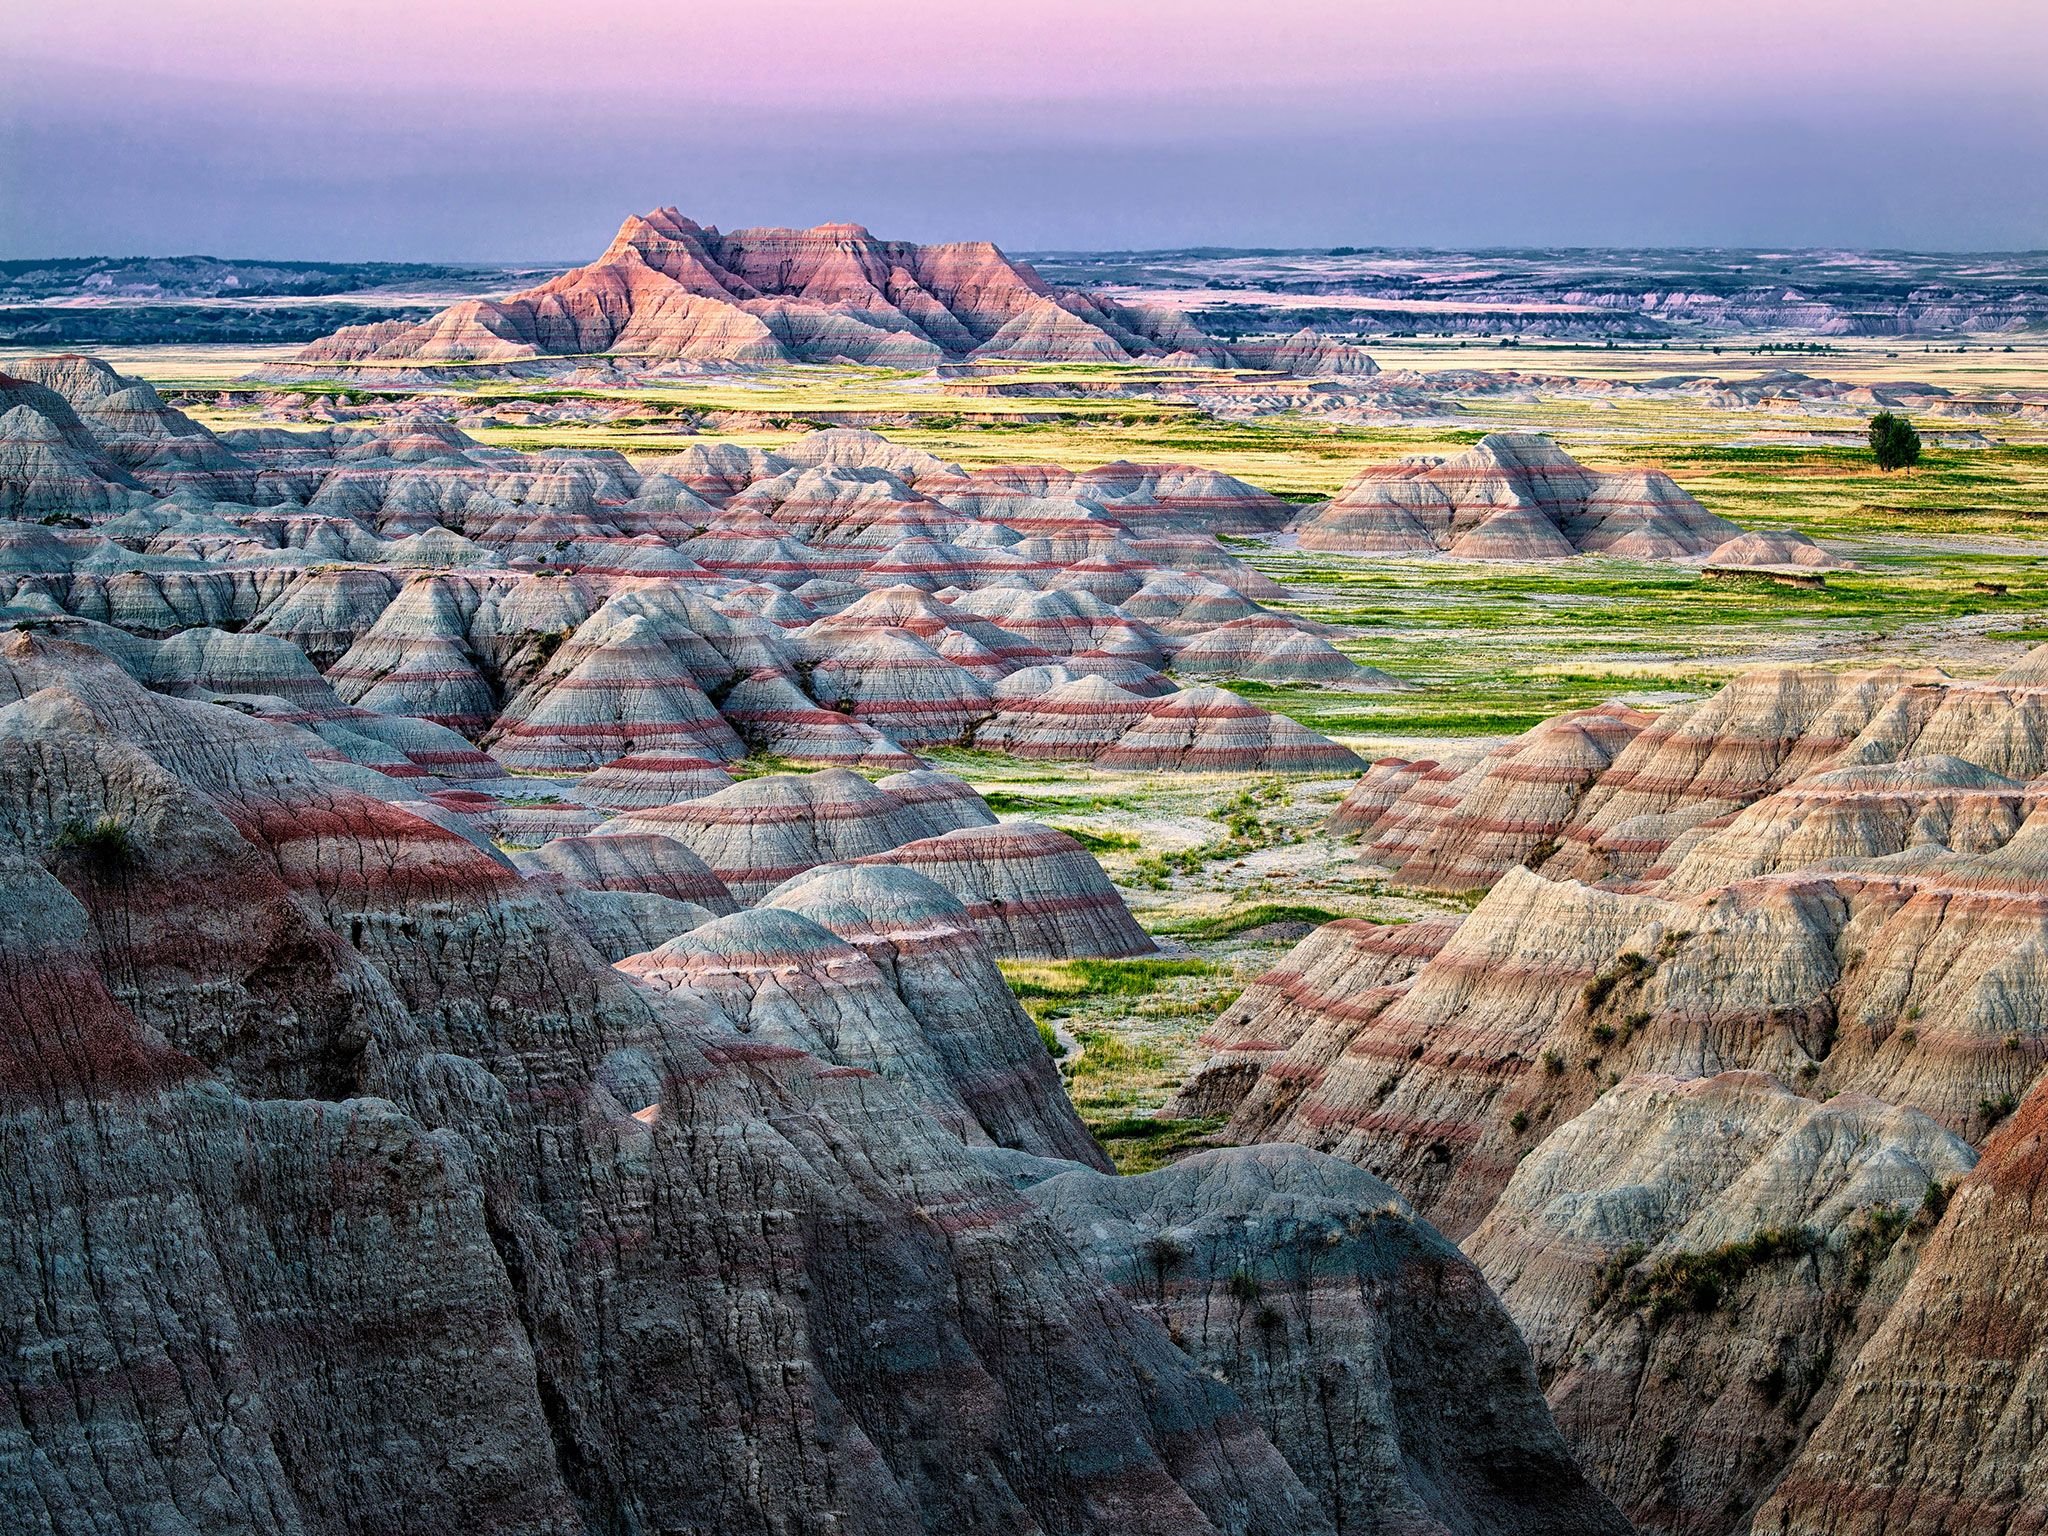 Badlands National Park defies Trump by tweeting facts about